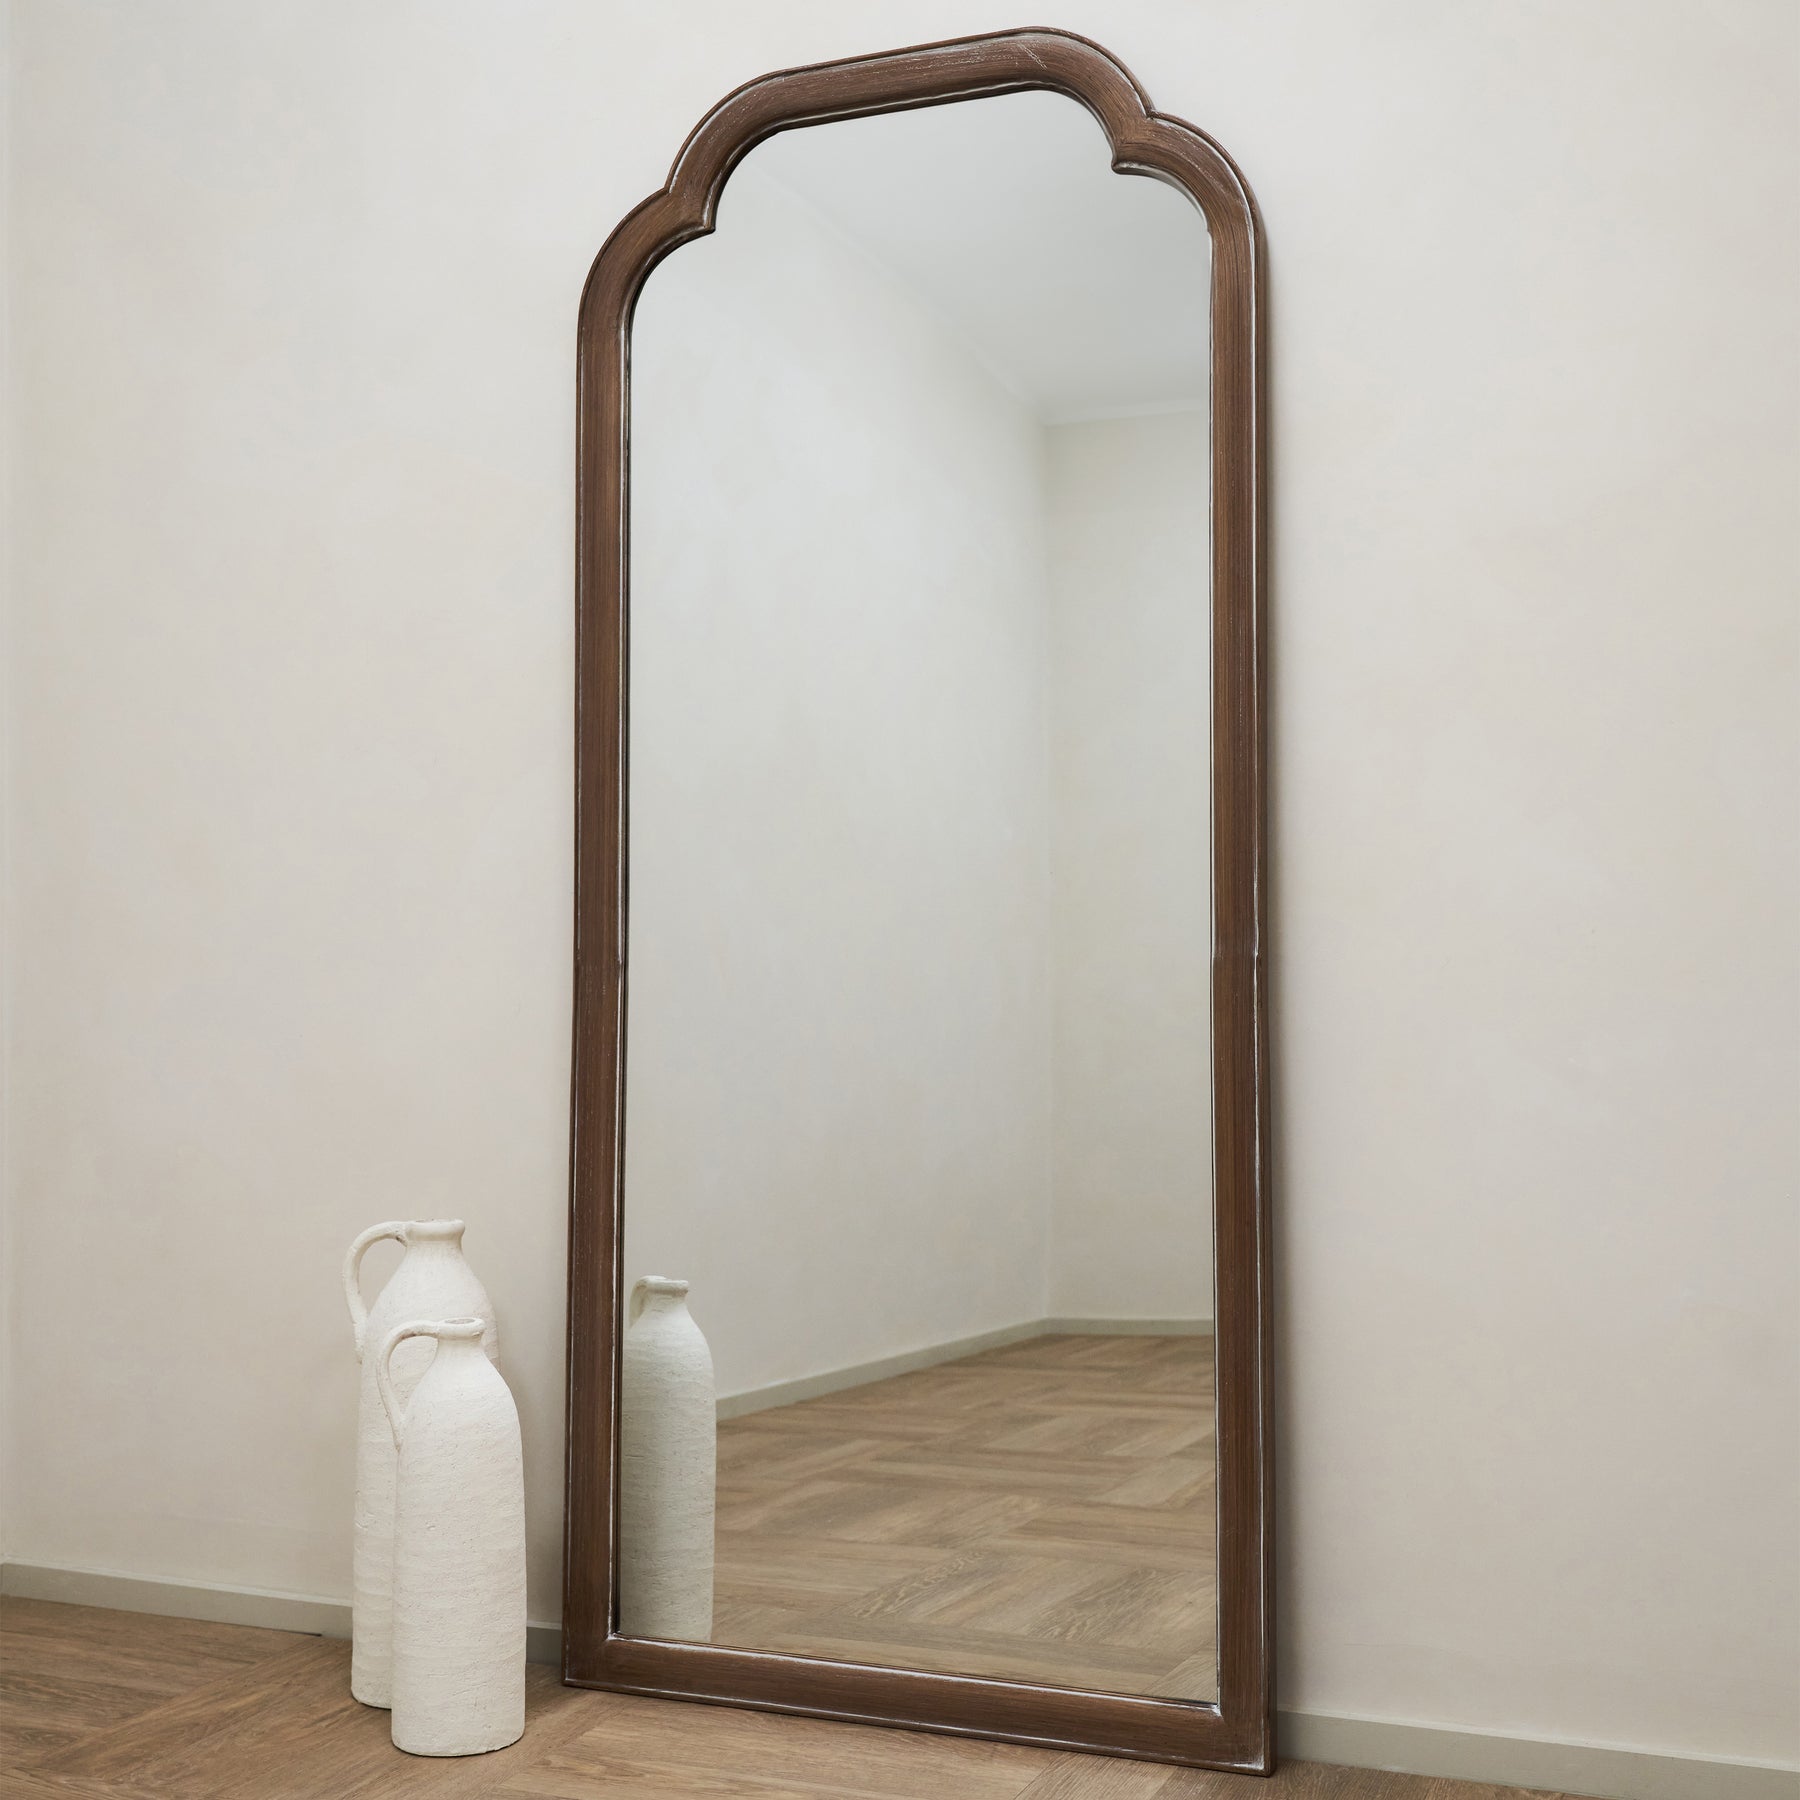 Full Length Washed Wood Arched Mirror next to ceramic vases